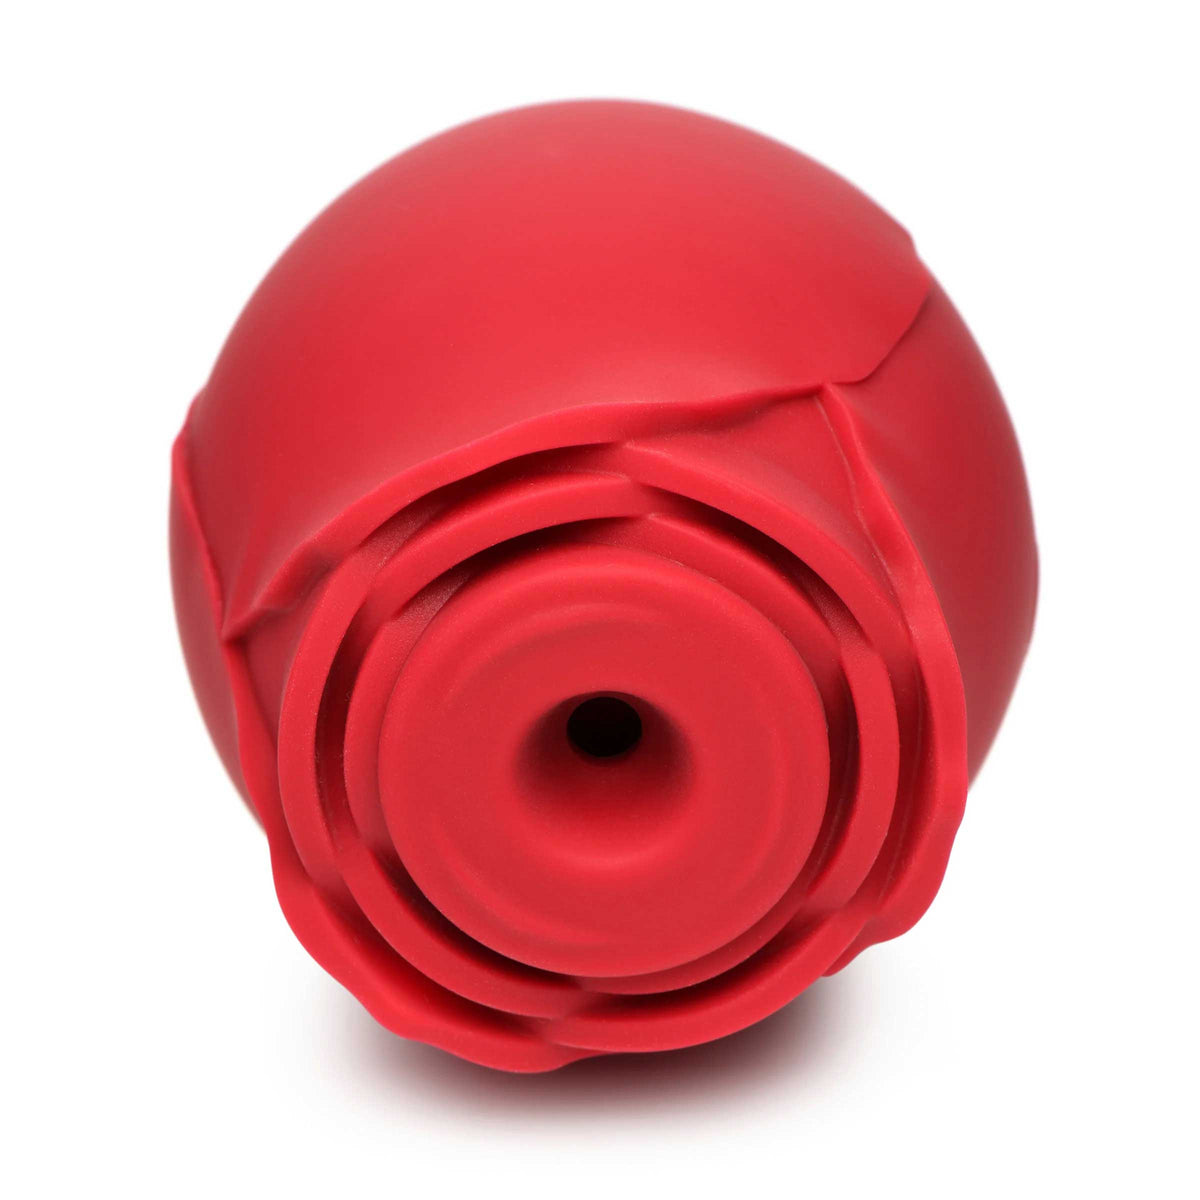 mystic rose sucking and vibrating silicone rose red